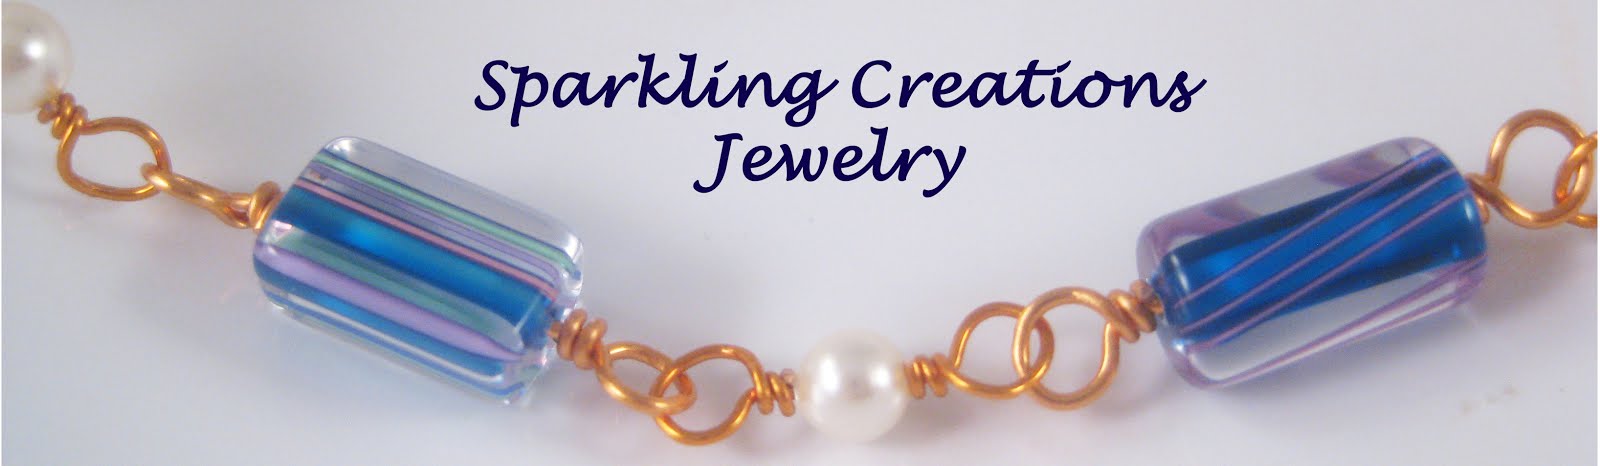 Sparkling Creations Jewelry